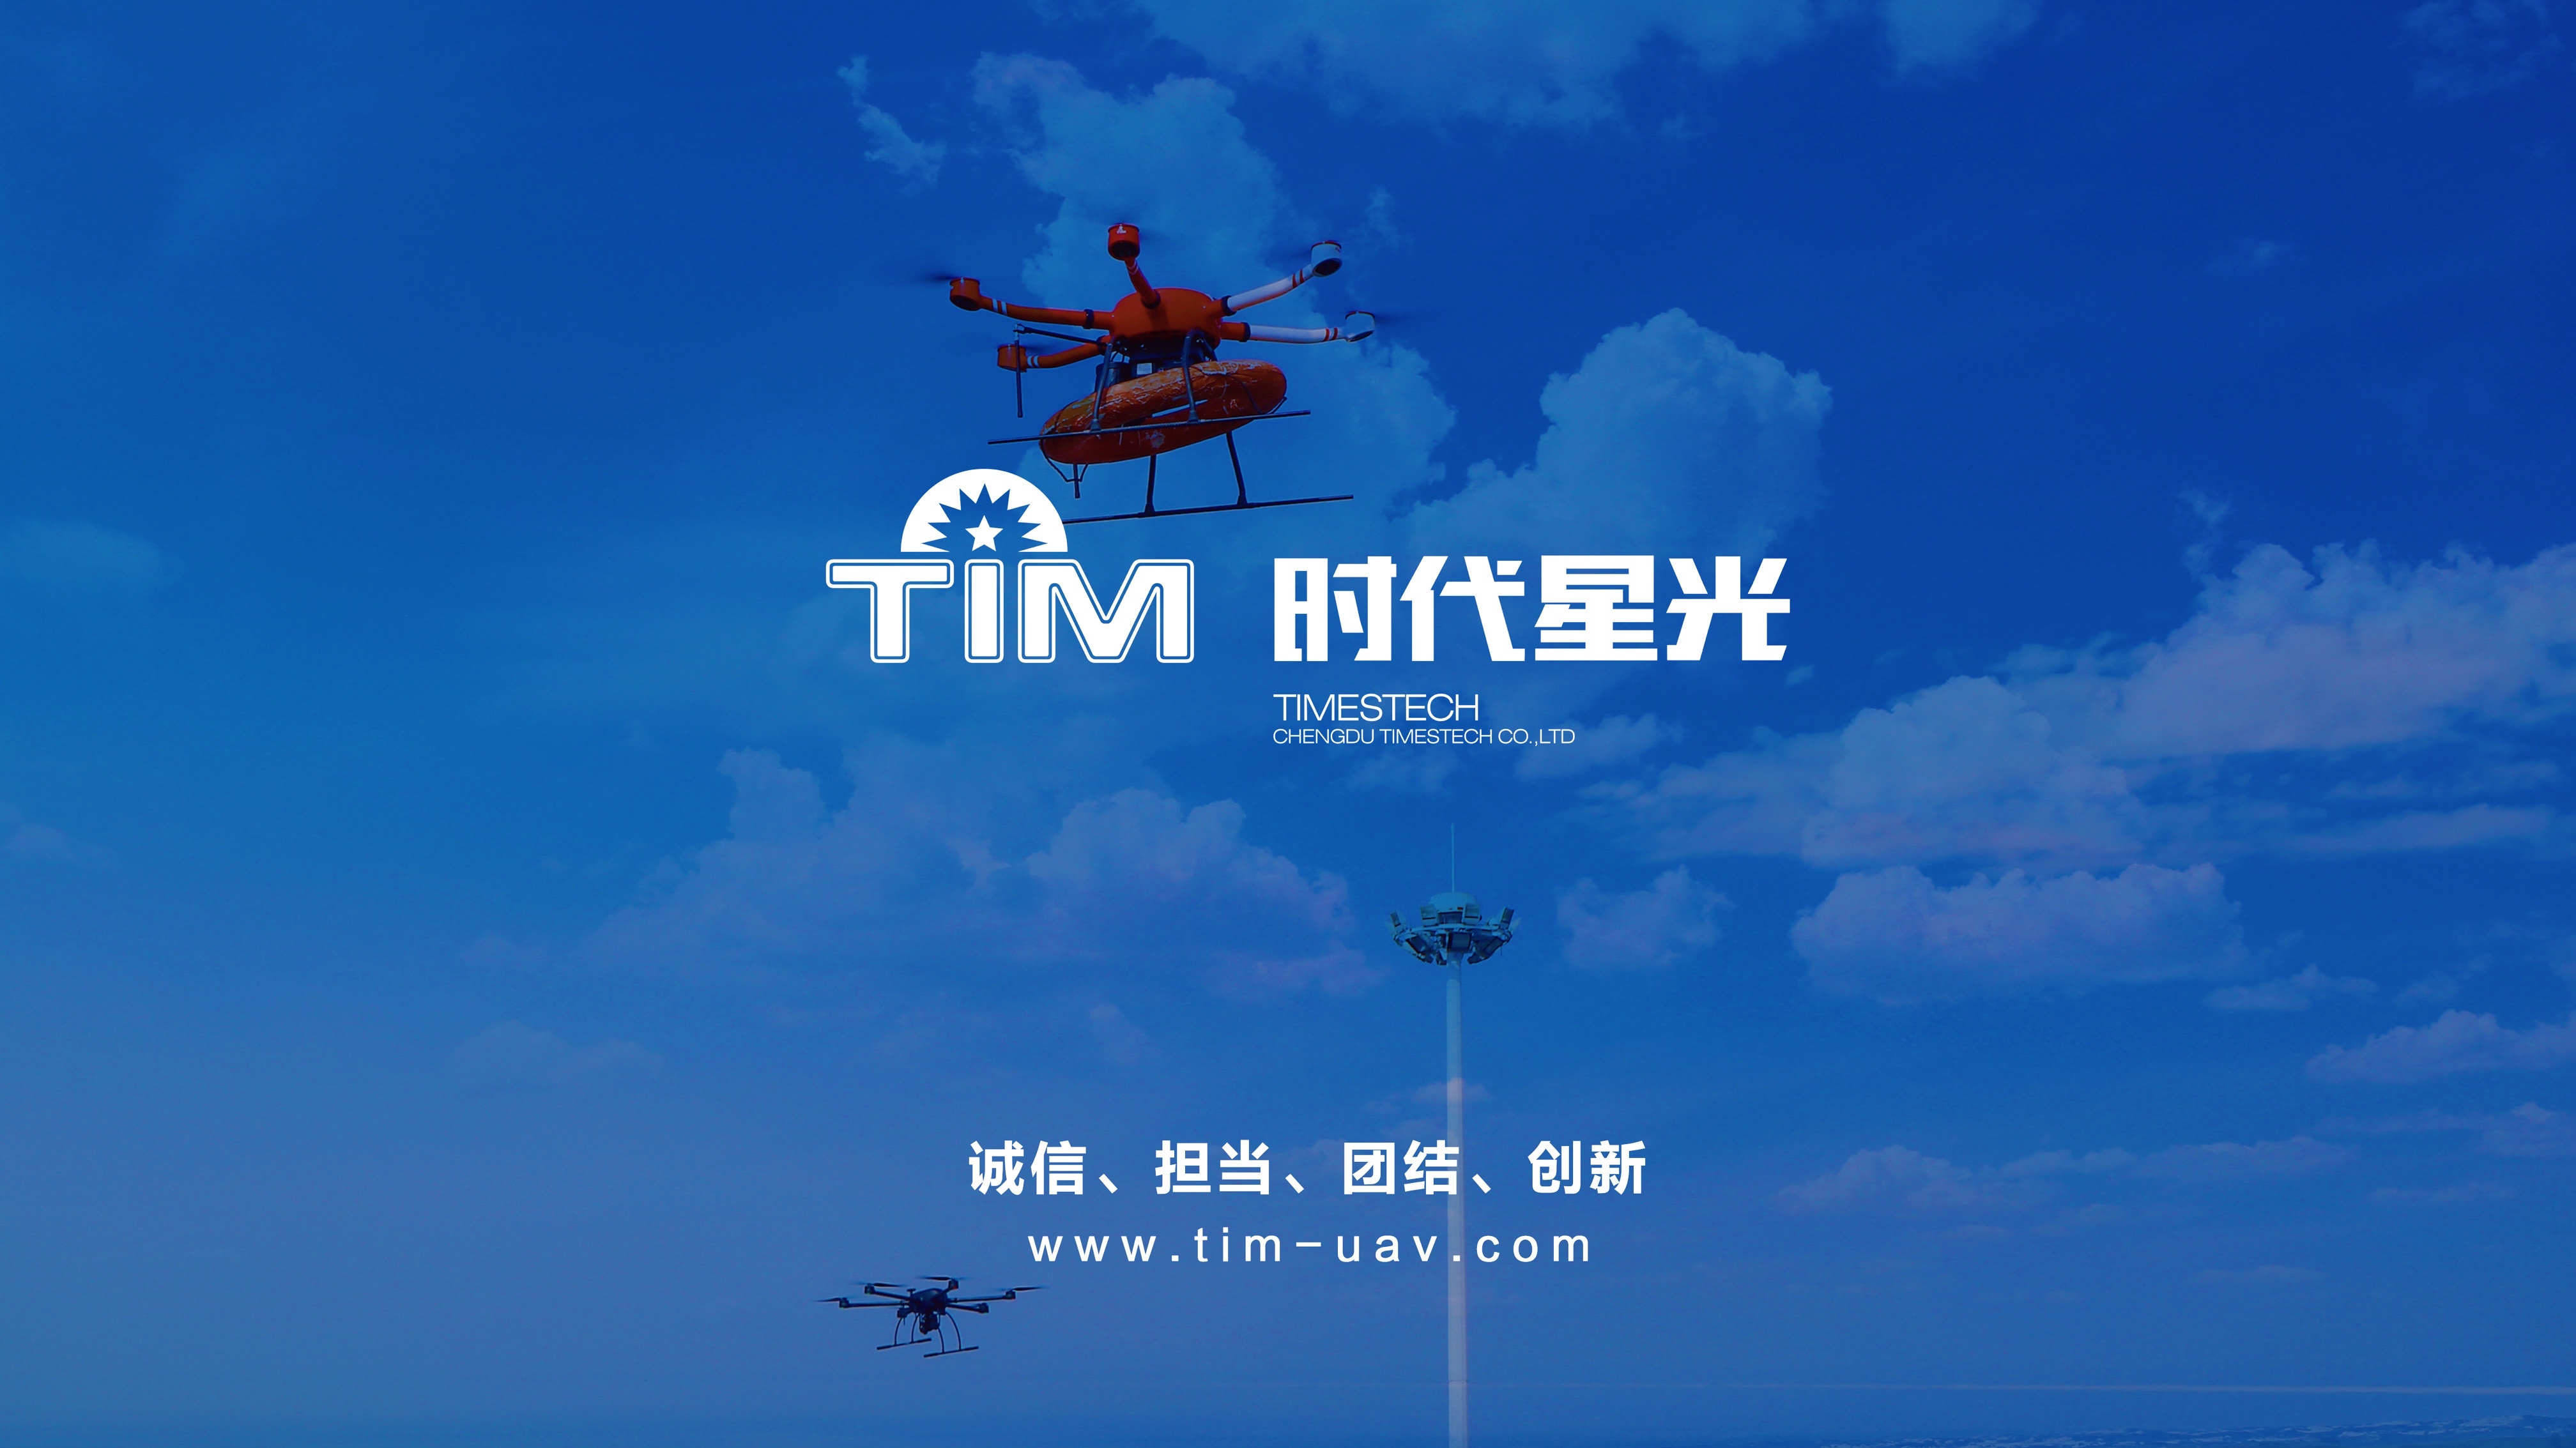 Era Timestech, a manufacturer of vehicle-mounted intelligent UAV systems, completed tens of millions of yuan in Series A financing